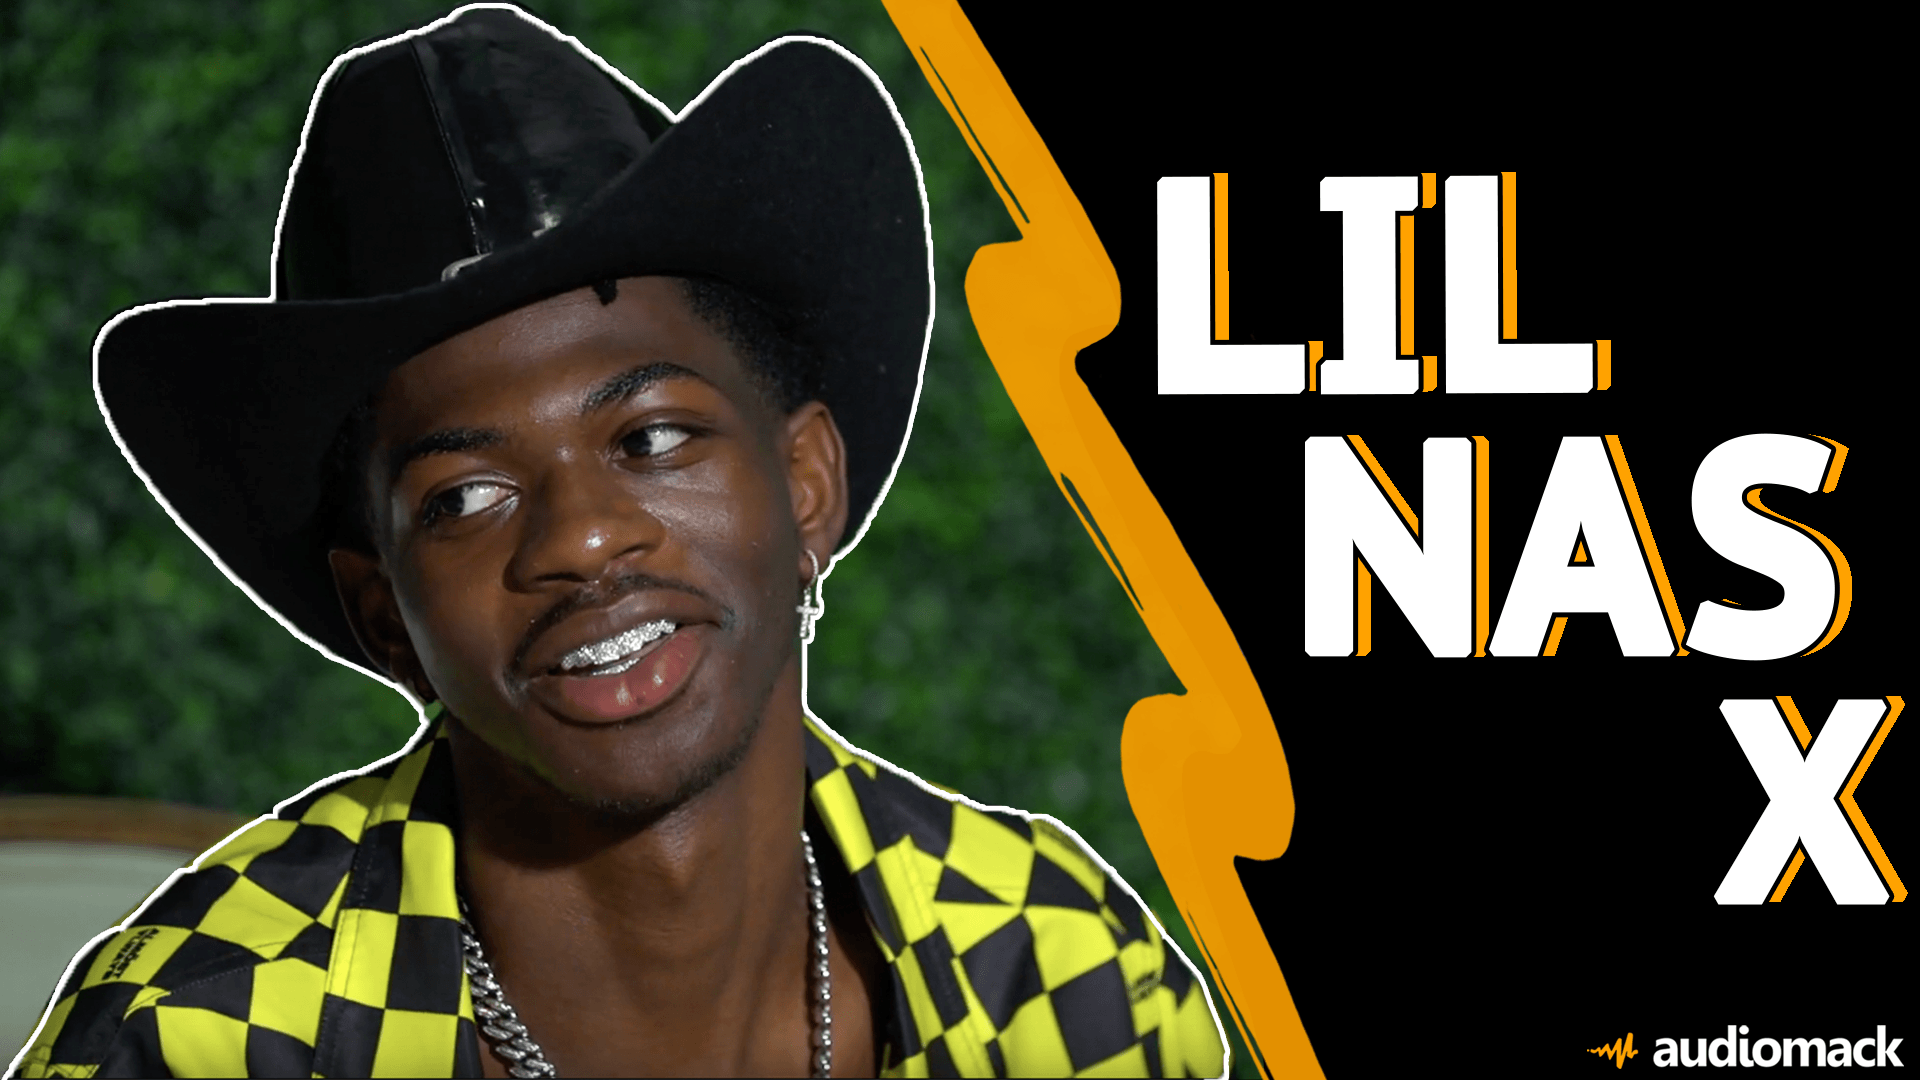 Watch Audiomack's Rolling Loud Podcast Interviews with Lil Nas X